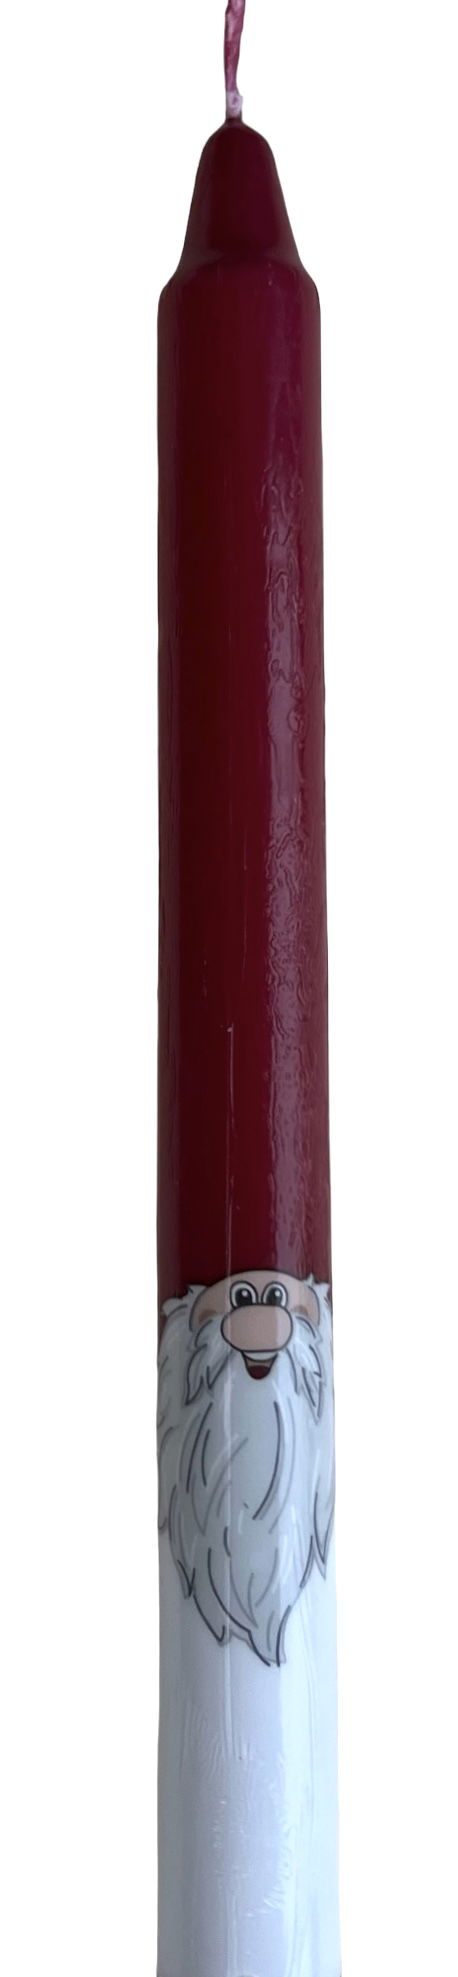 Red "Nisse" candle, 24 cm